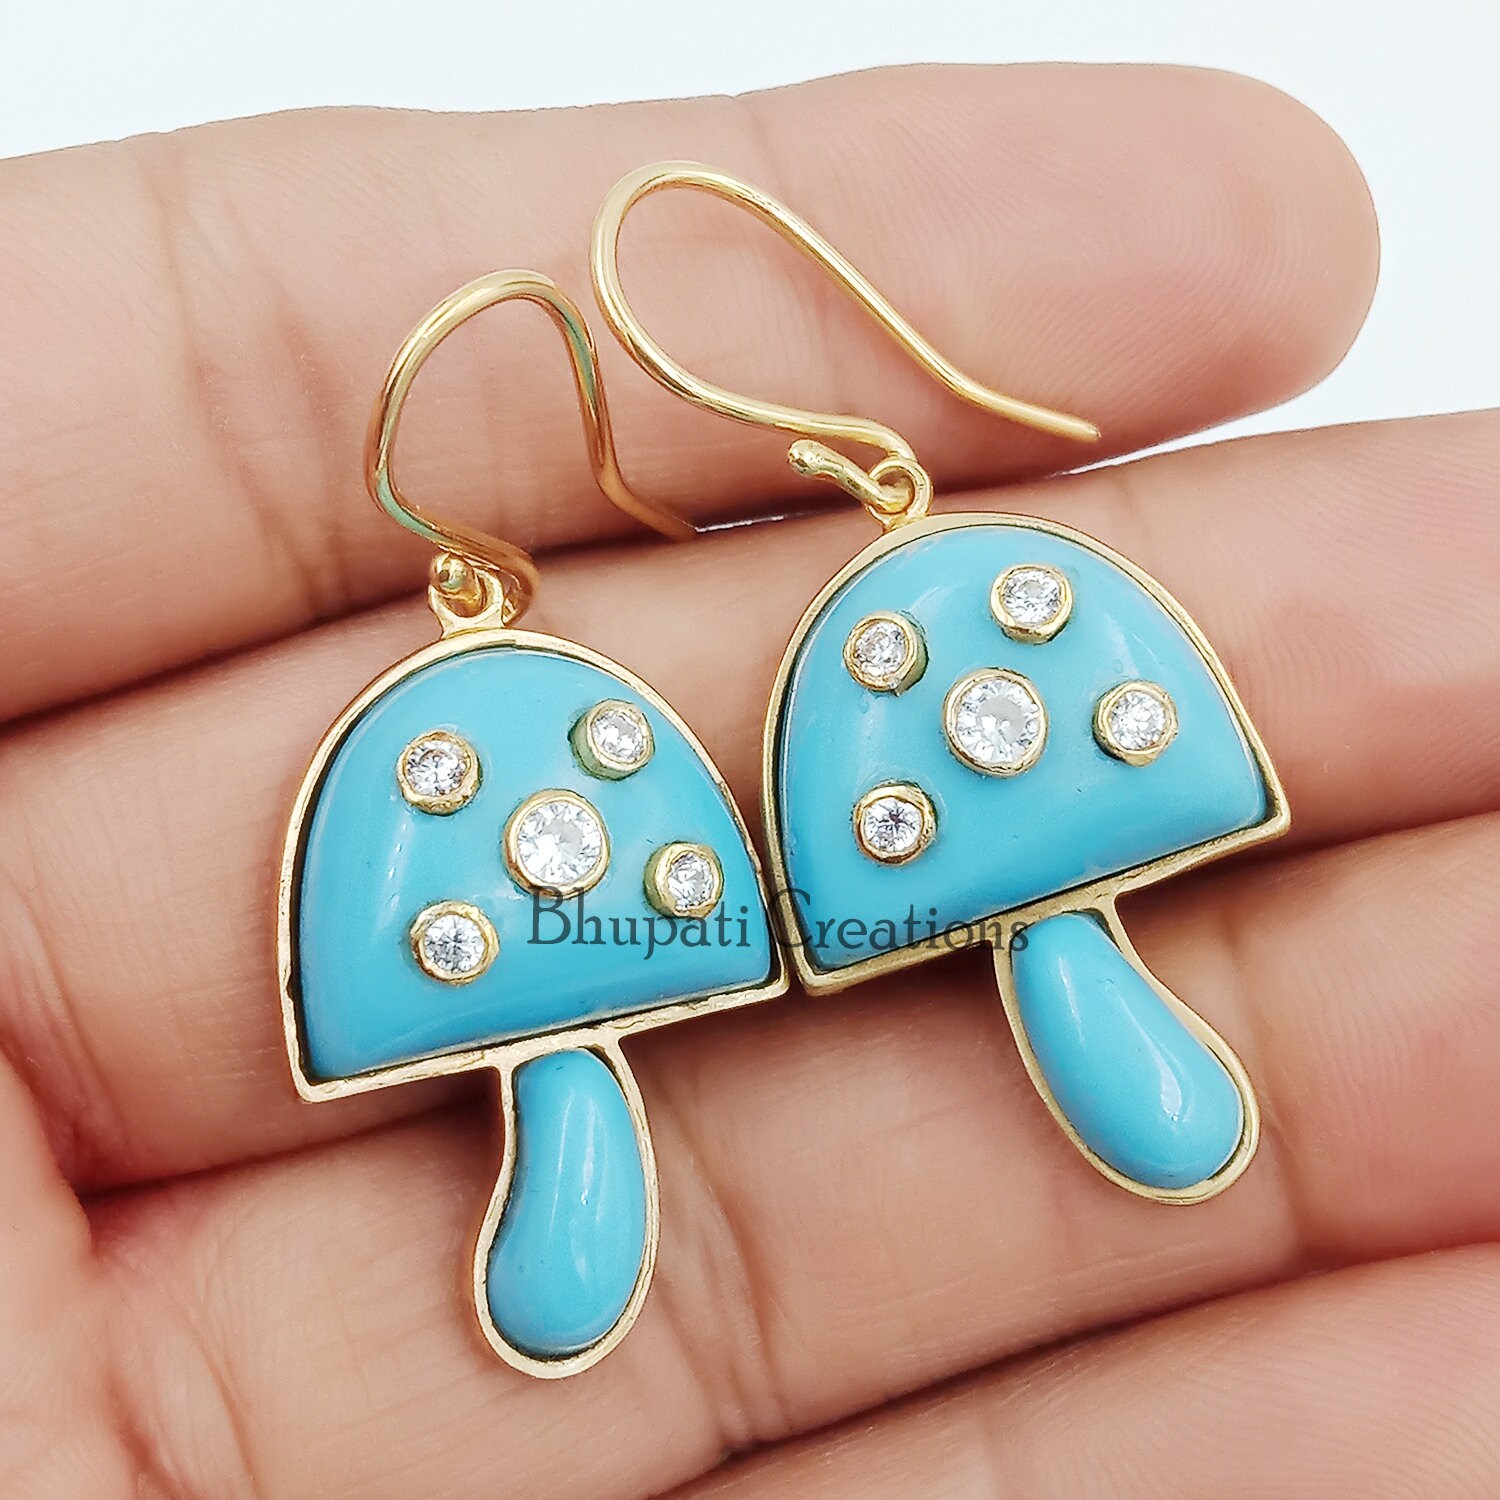 Sperrins Mushroom Dangling Earrings Necklace Set Mushroom Shape Drop Dangle Earrings Mushrooms Necklaces Jewelry Chains For Women Girls Daughters 